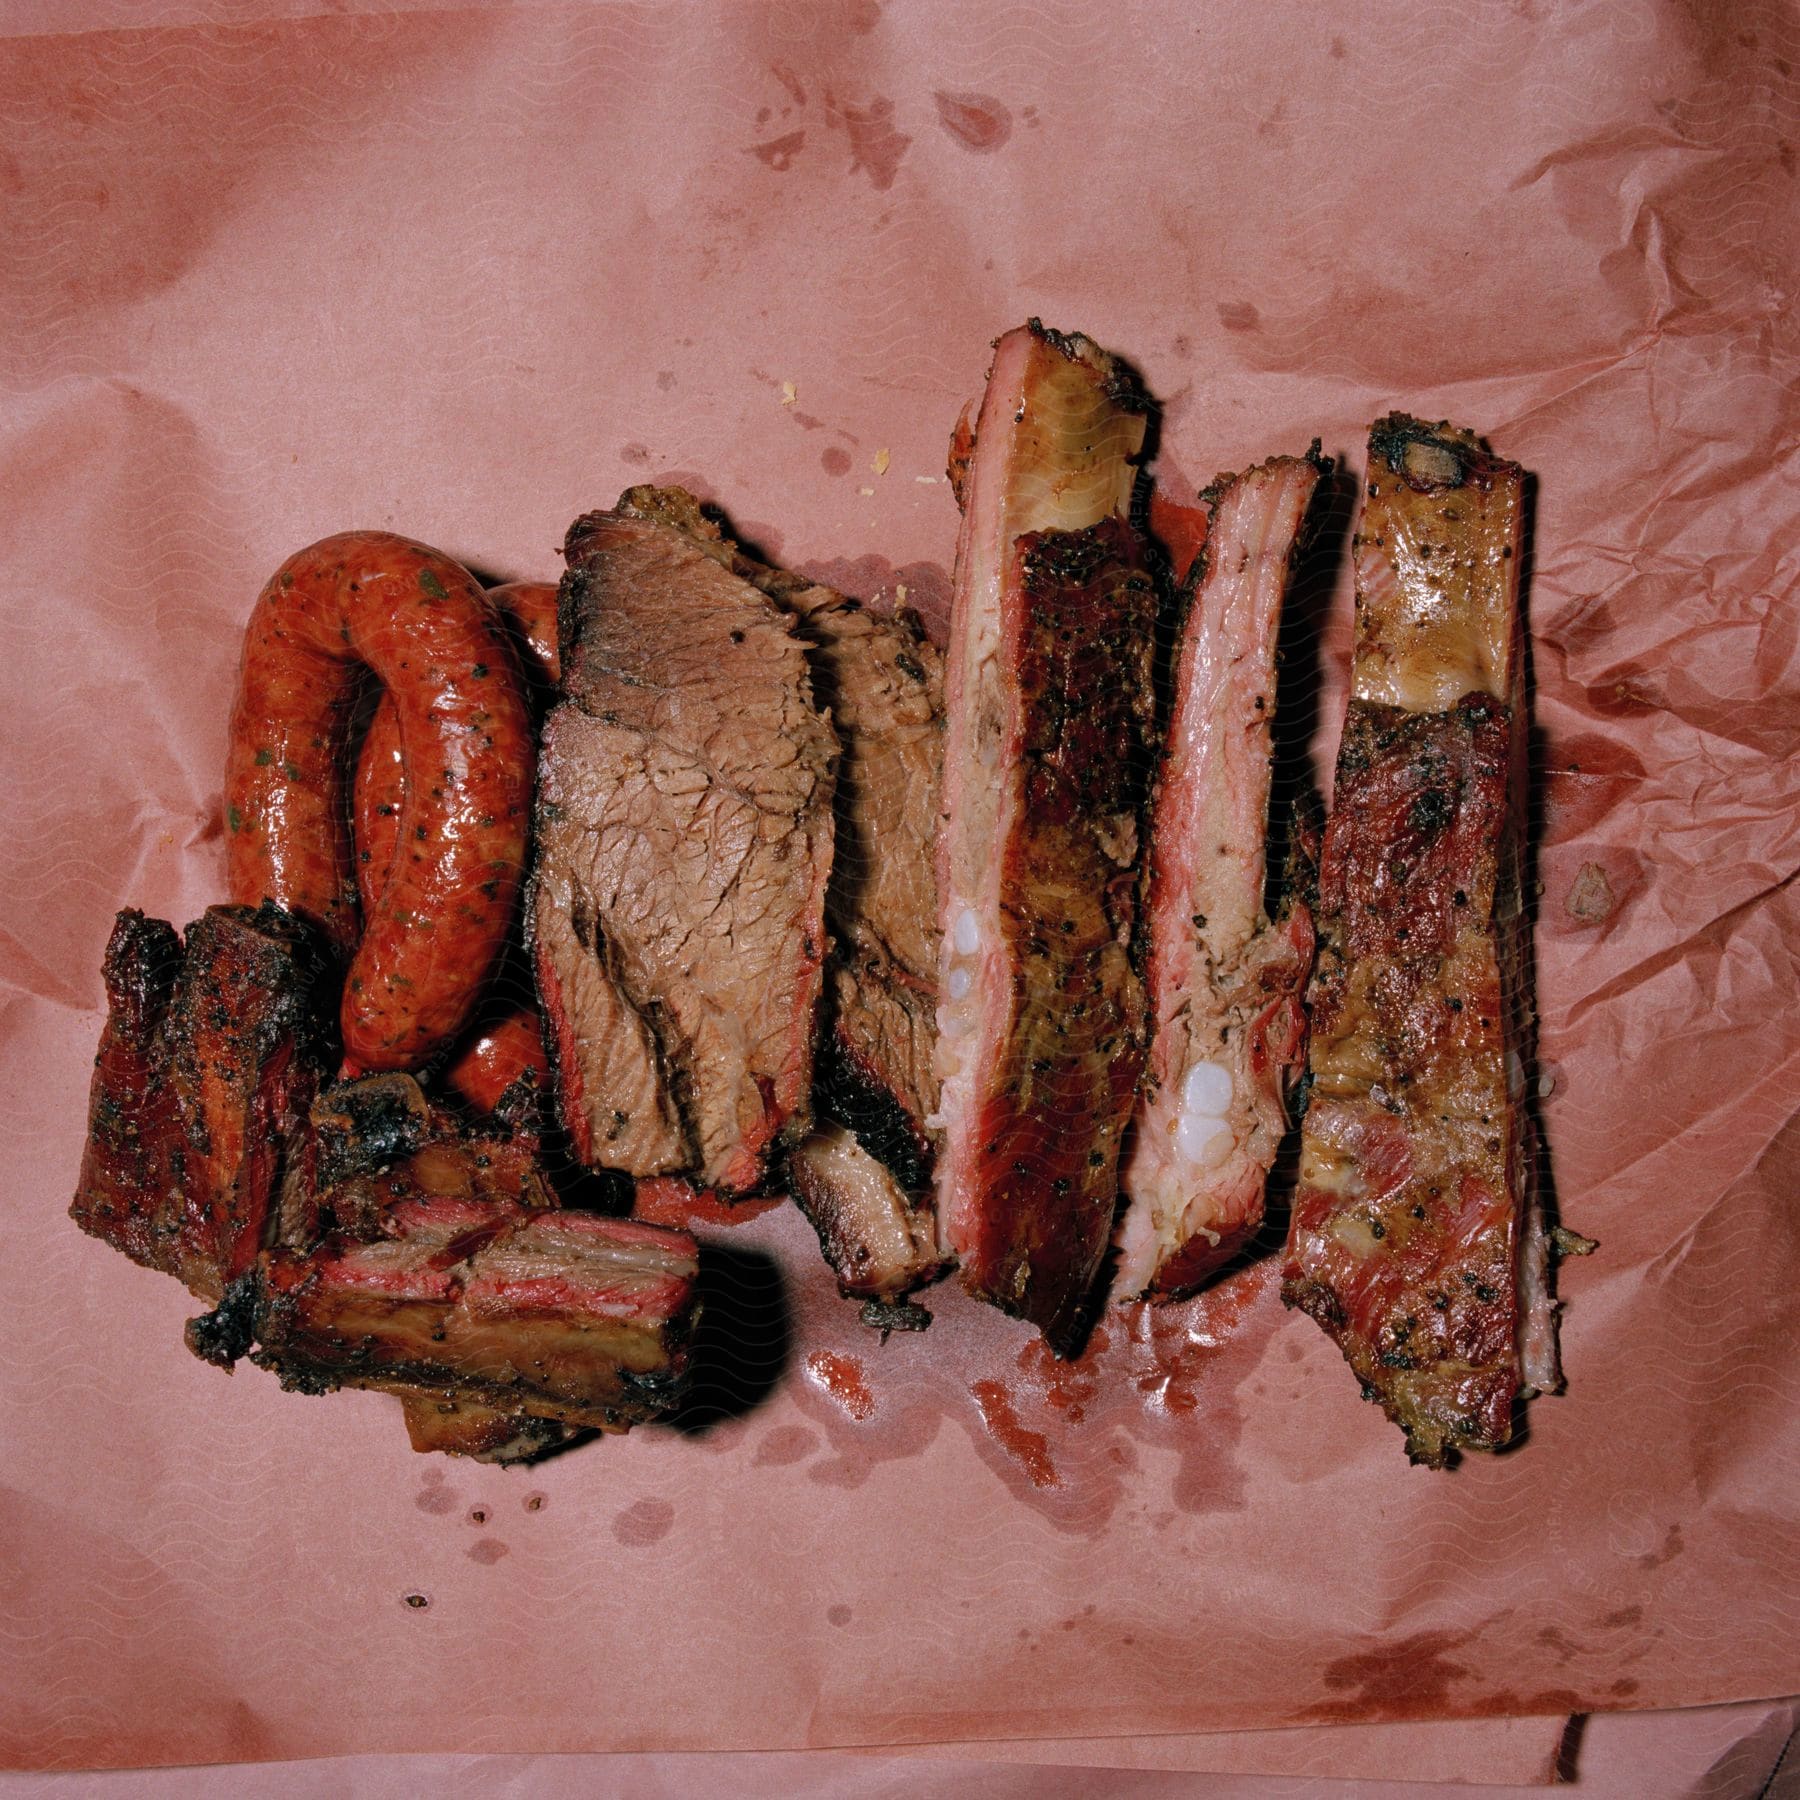 Ribs sausage and other meat are shown on pink paper